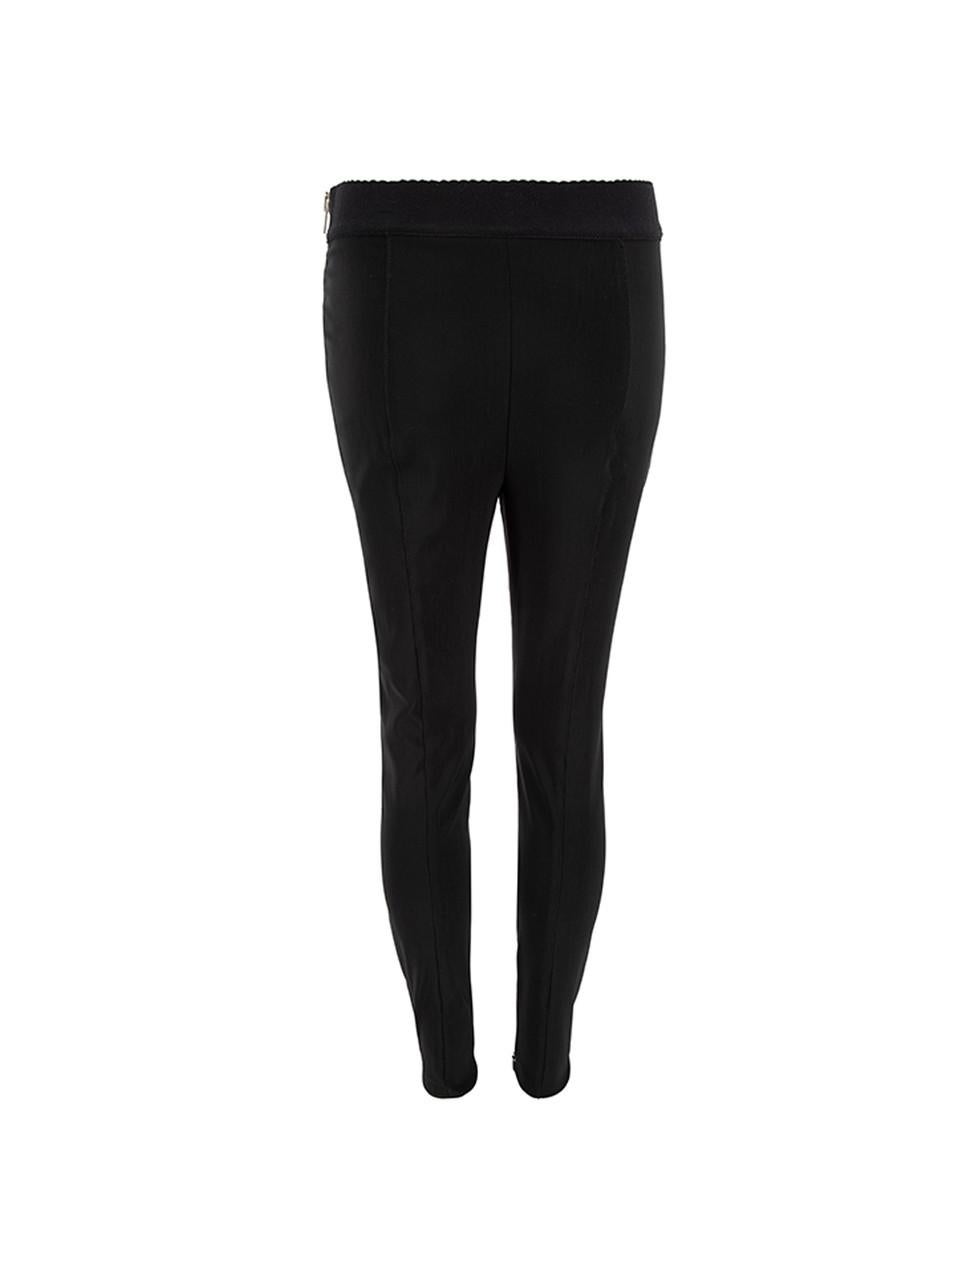 Alexander Wang Women's Black Oversized Zip Accent Skinny Trousers In Excellent Condition For Sale In London, GB